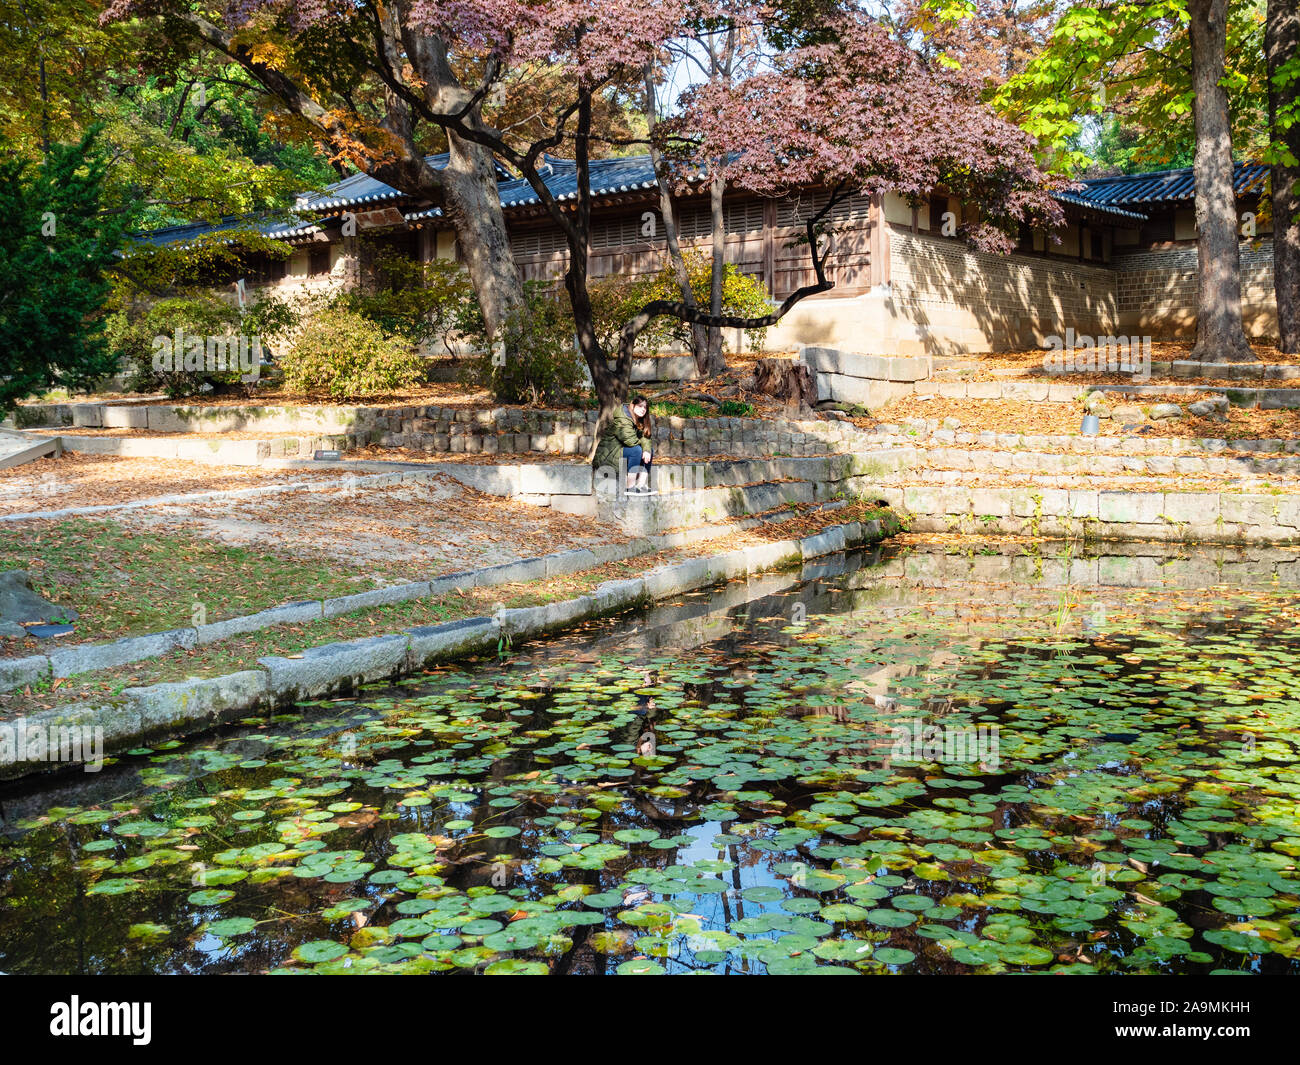 SEOUL, SOUTH KOREA - OCTOBER 31, 2019: visitor on waterfront of Aeryeonji pond with lotus plant in Huwon Secret Rear Garden of Changdeokgung Palace Co Stock Photo